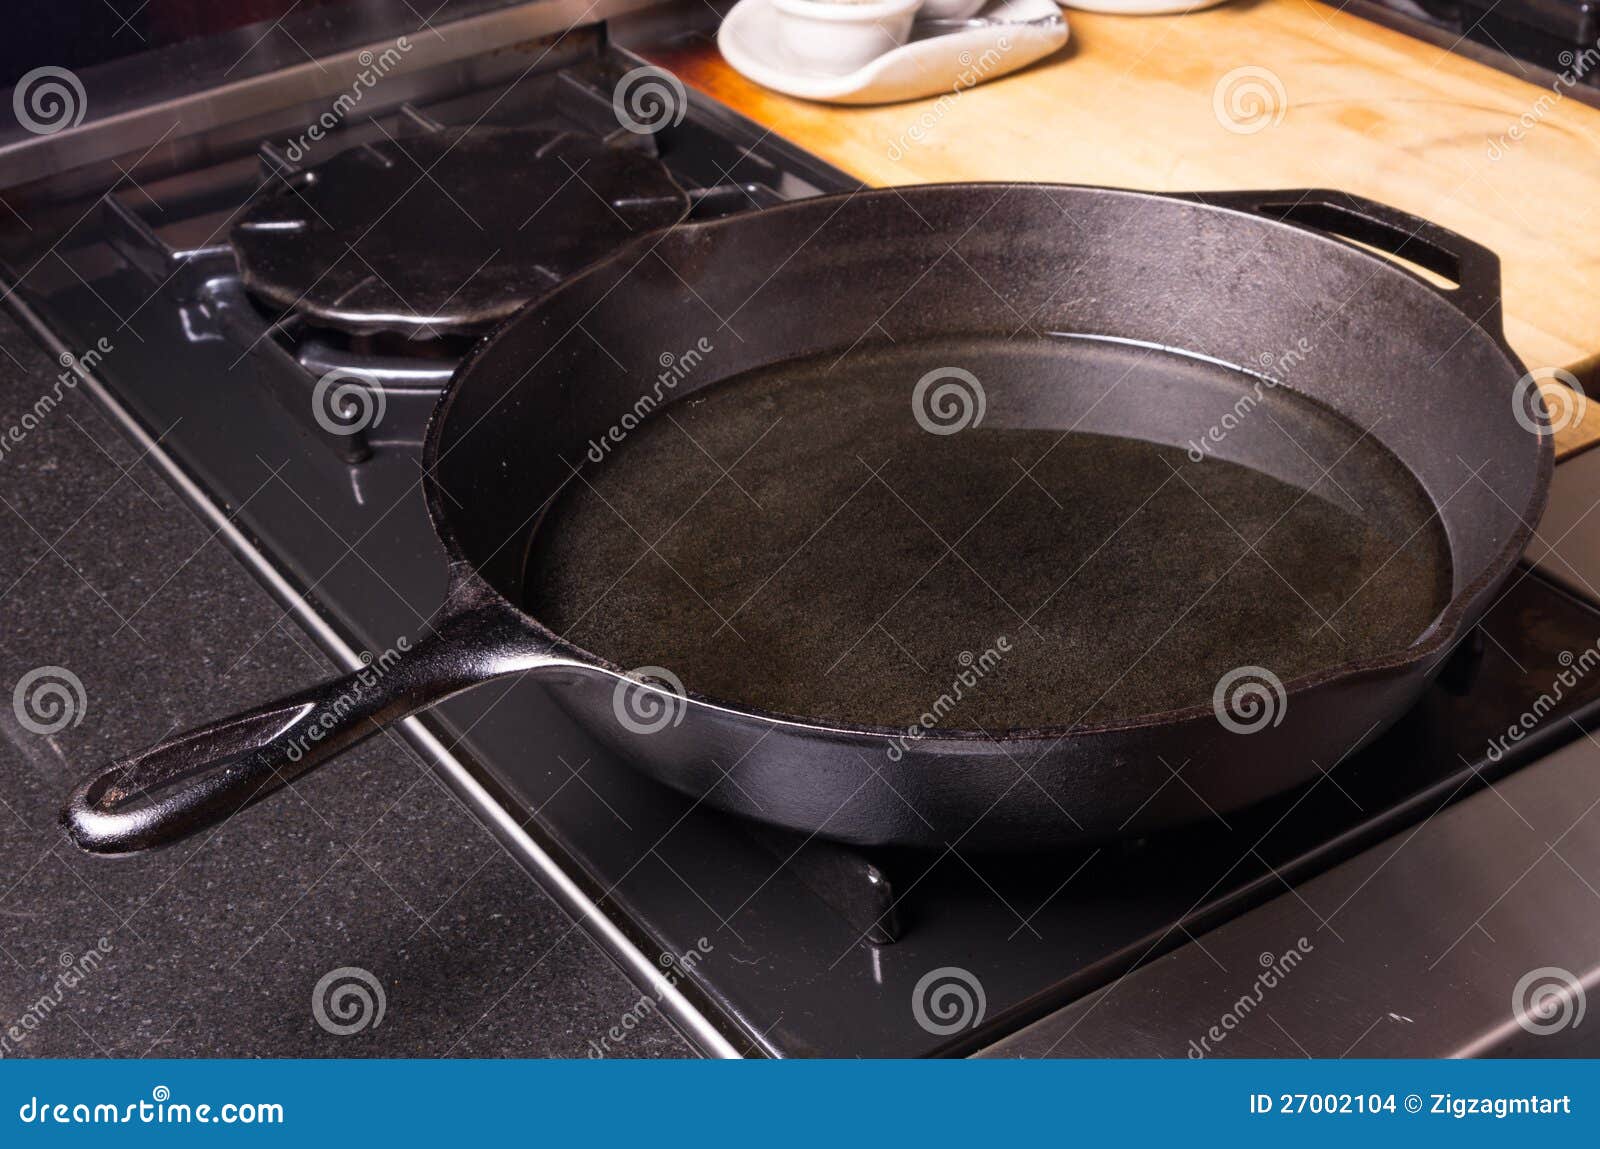 cast iron skillet or fry pan on stove